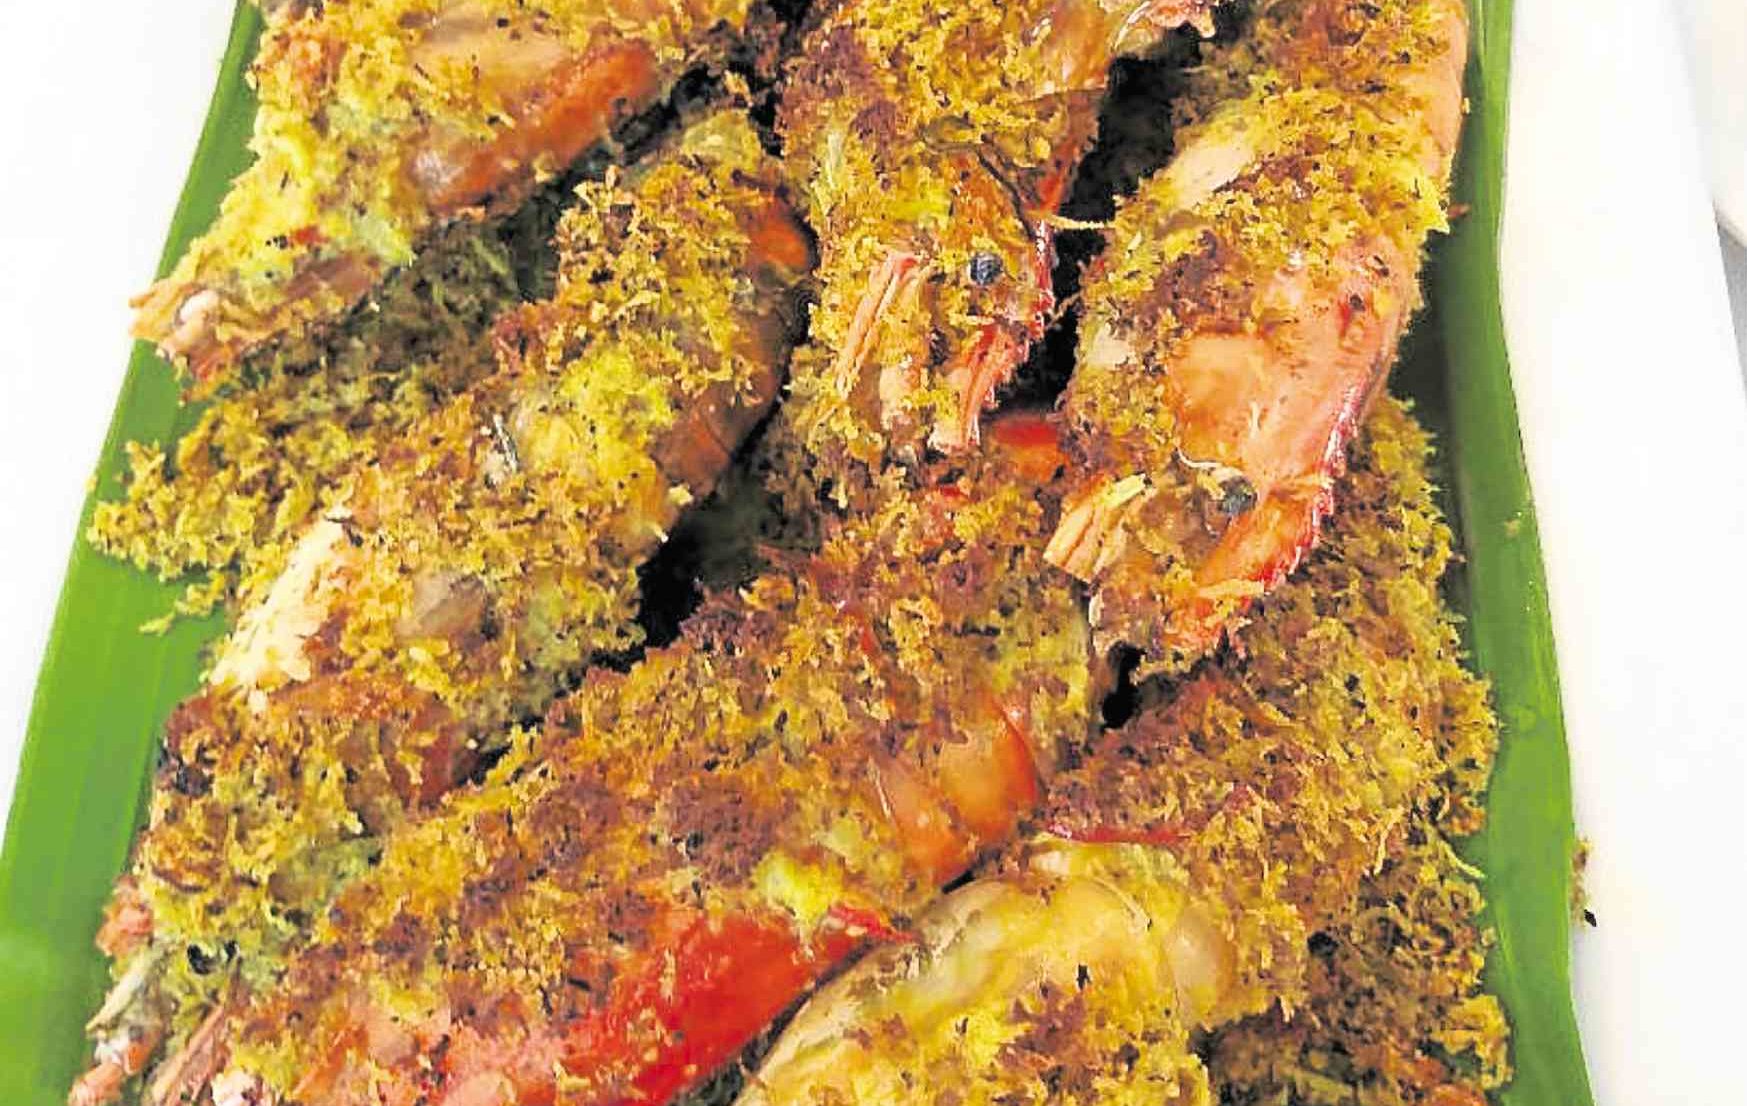 Fish and coconut (with chili, turmeric) —Mindanao dishes to remember